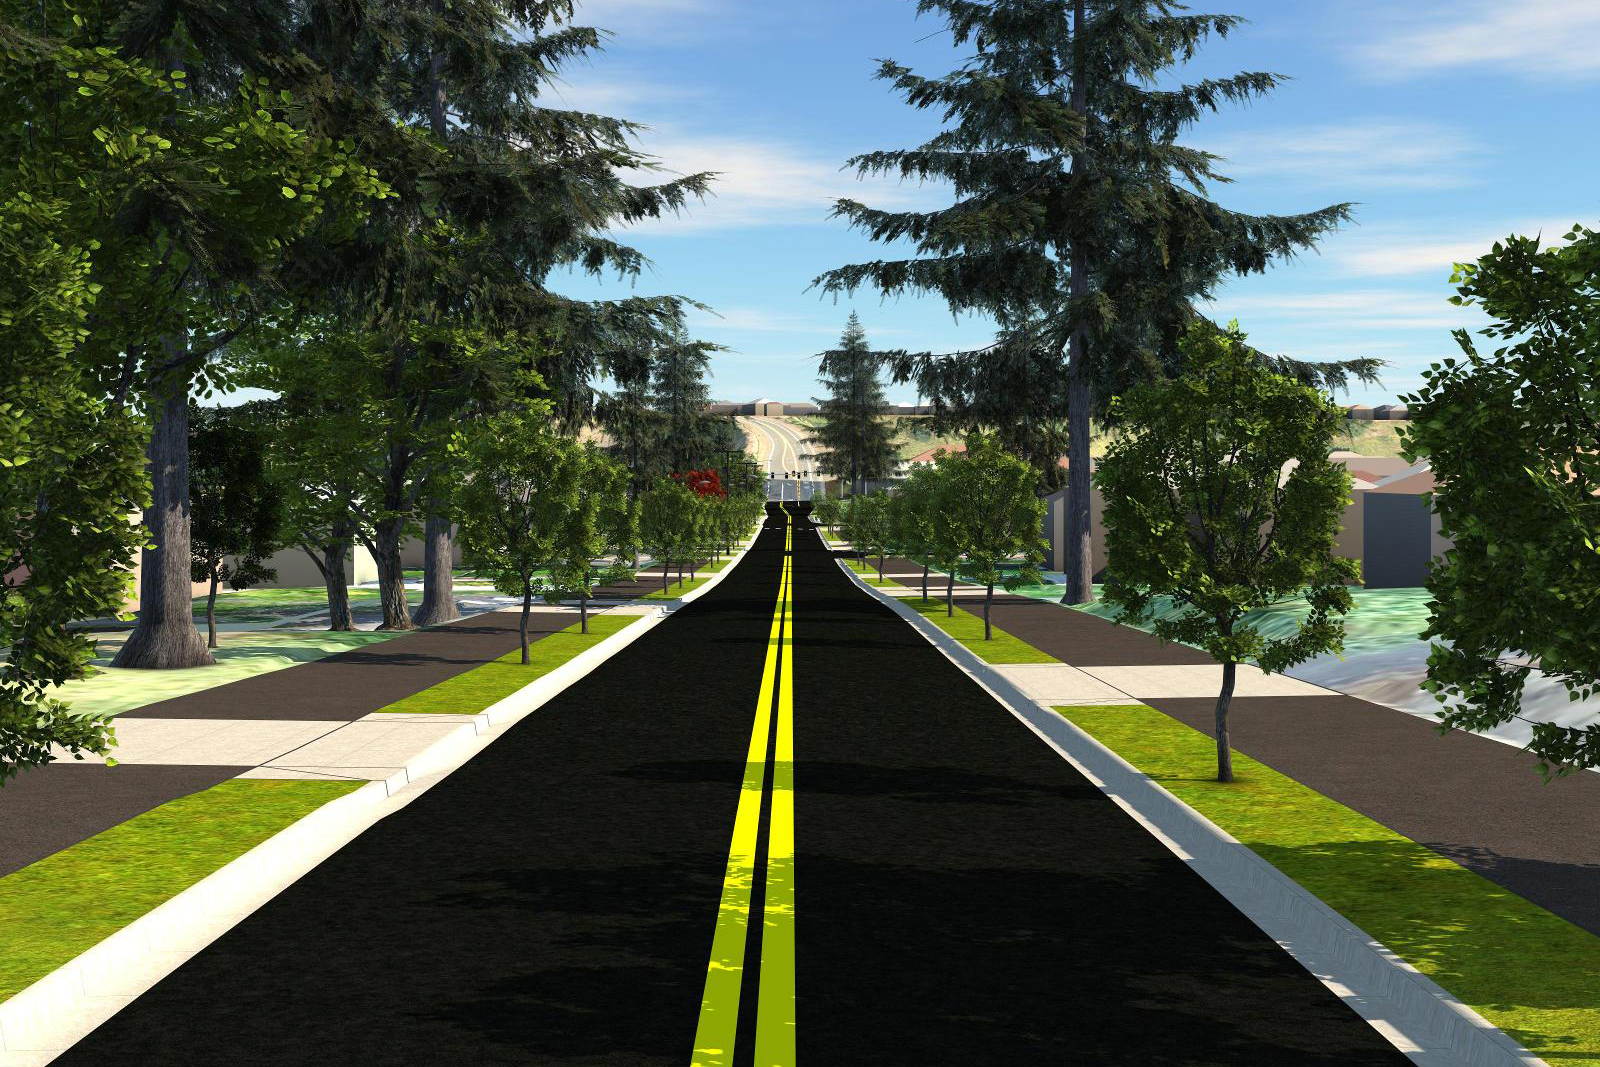 Drawing of proposed new typical roadway section